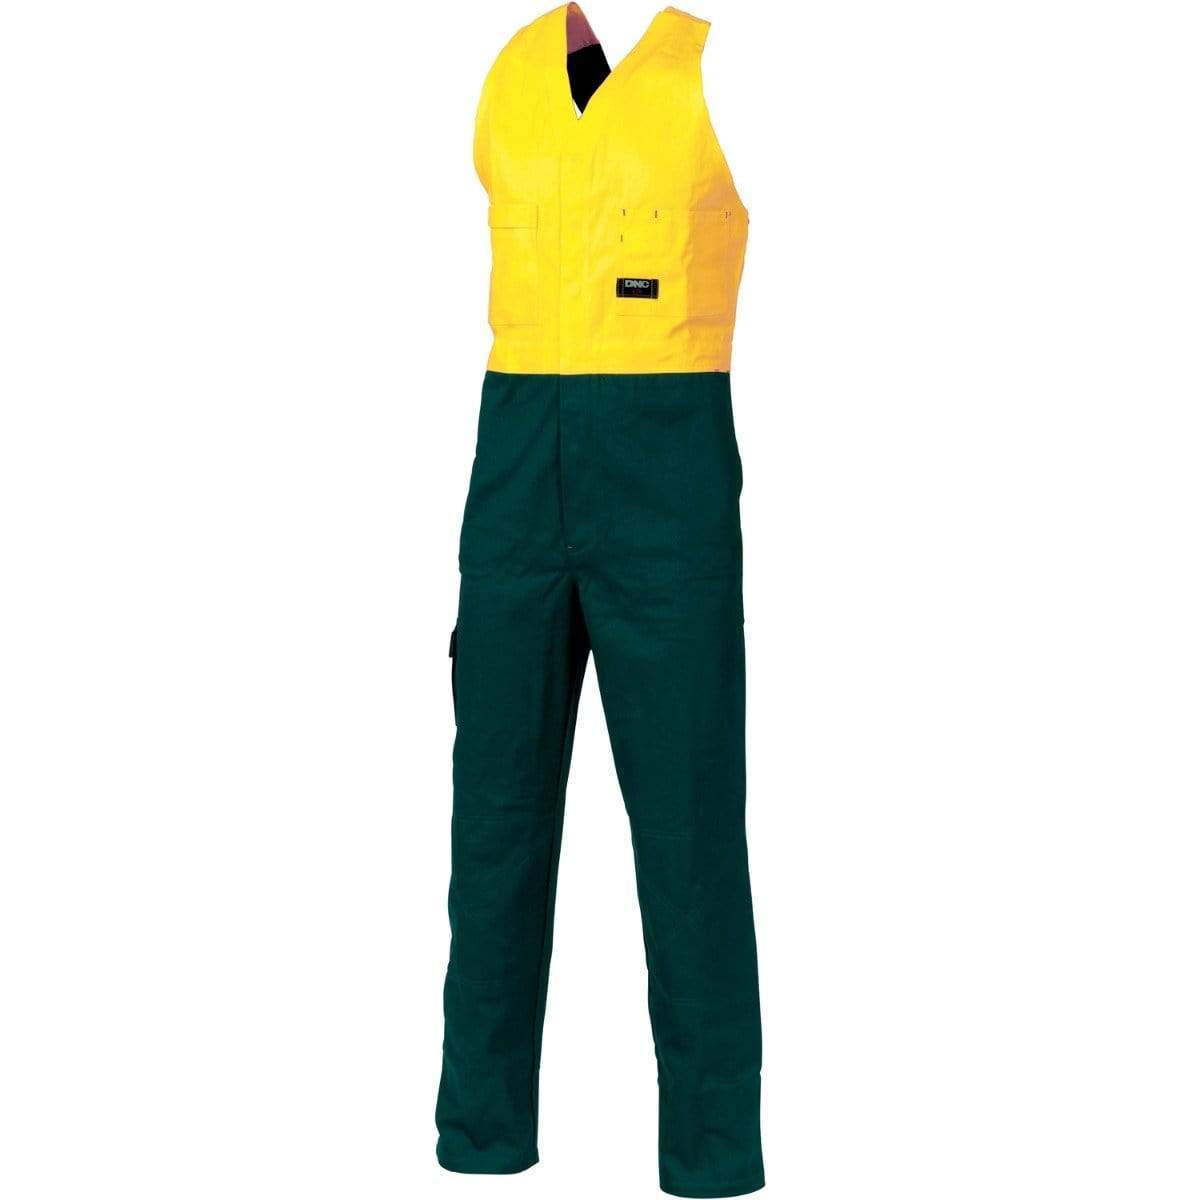 DNC Workwear Work Wear Yellow/Bottle Green / 77R DNC WORKWEAR Hi-Vis Two-Tone Cotton Action Back Overall 3853